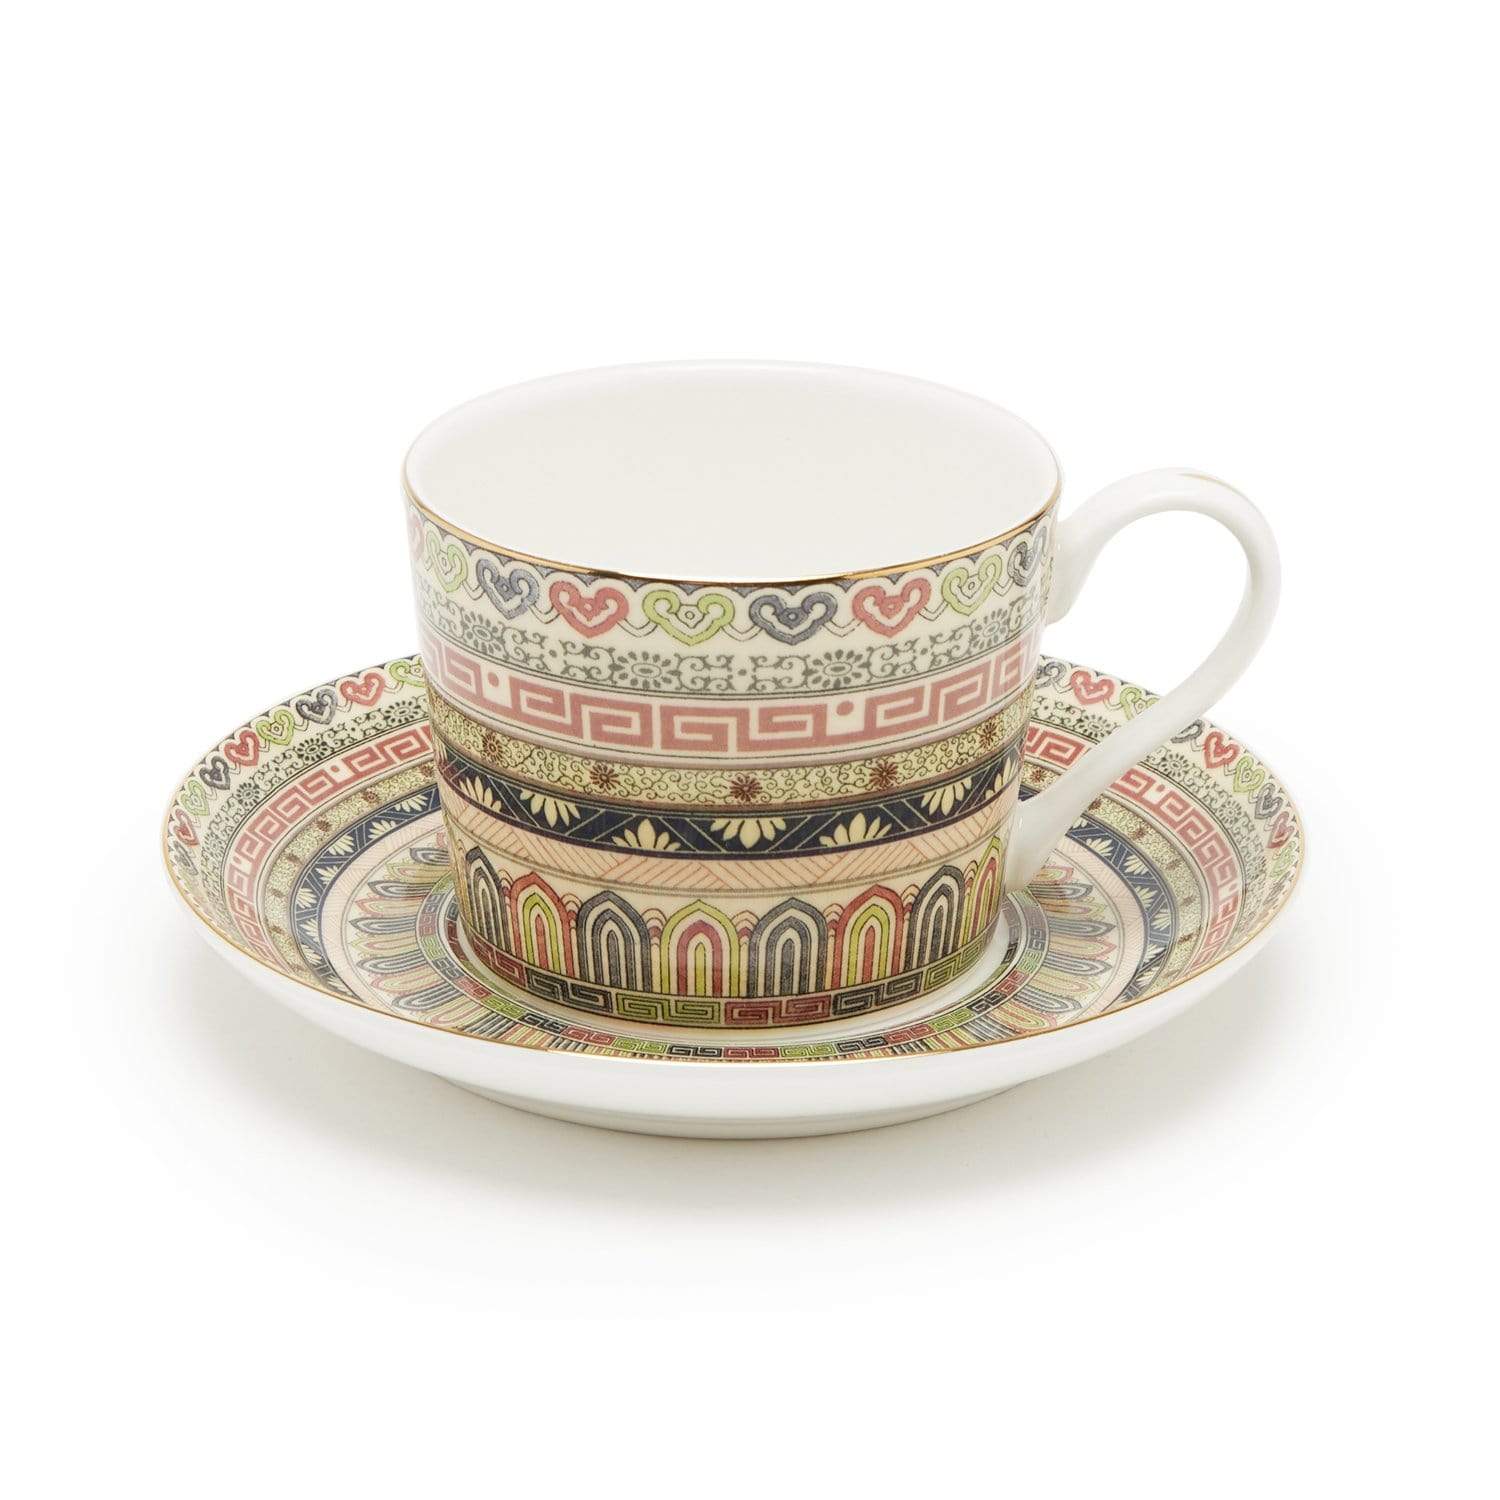 PURDIE BROWN 12PC COFFEE CUP & SAUCER - S18183D-GNPCNS057